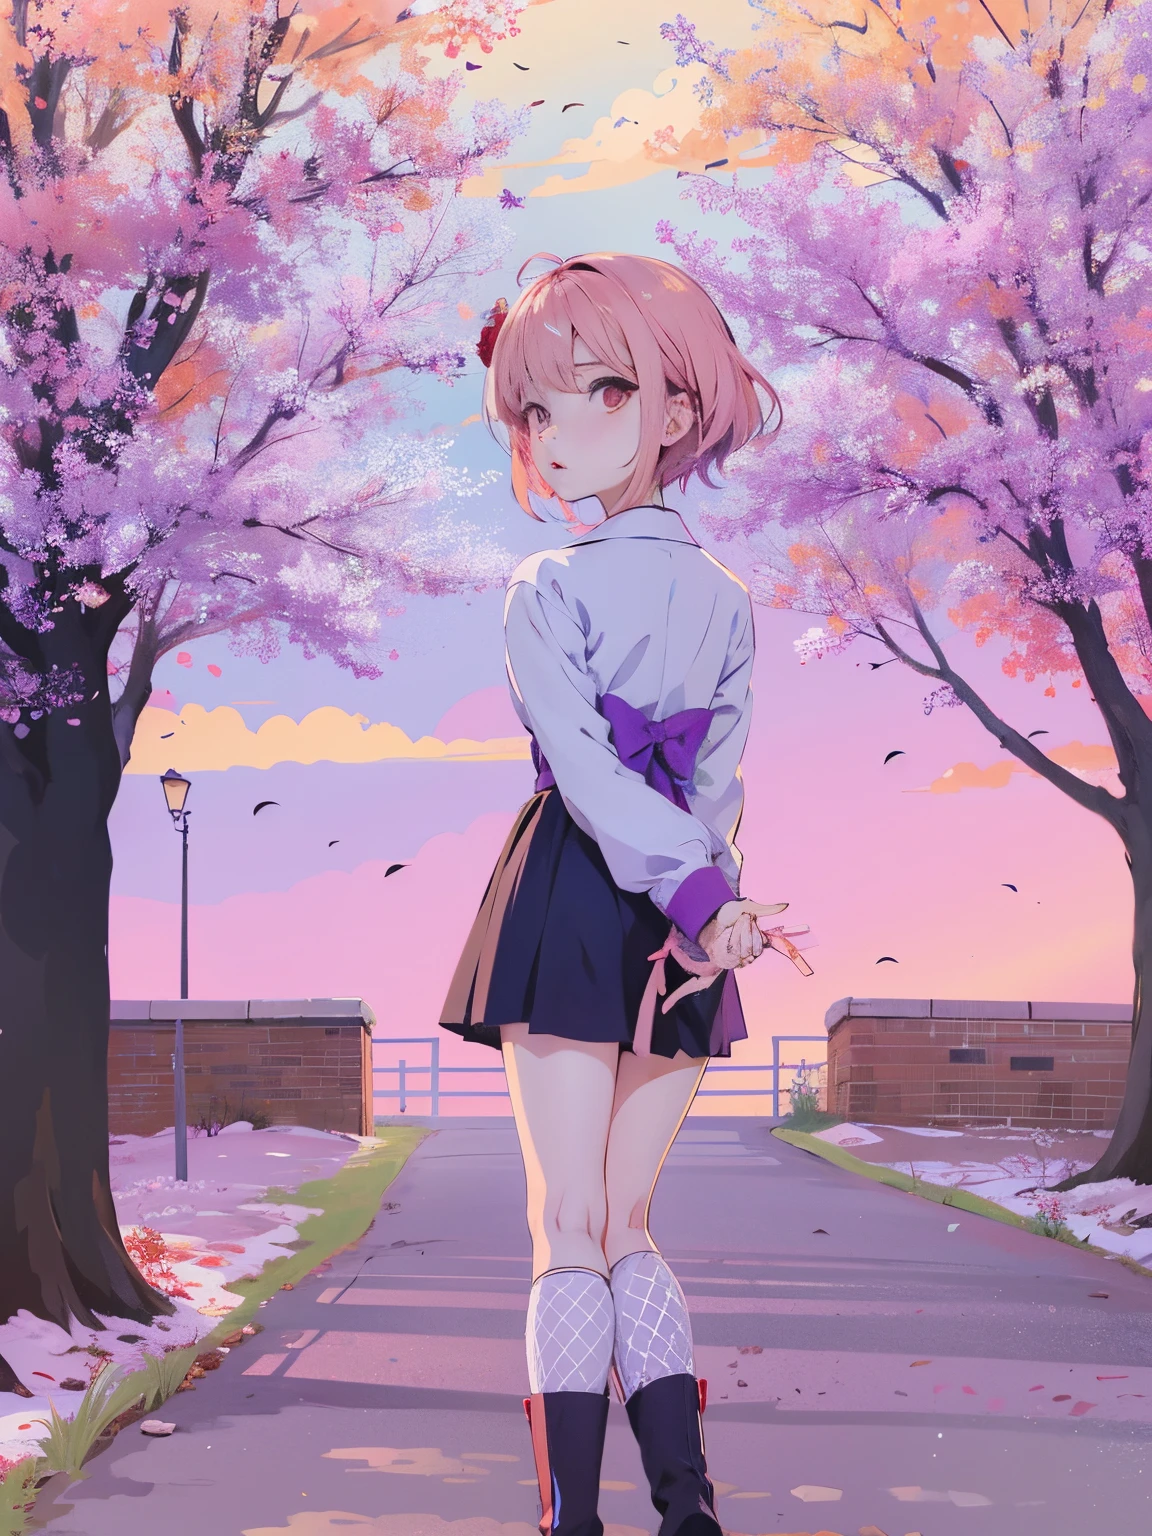 Anime girl in short skirt and tight stockings standing in a park., Full length portrait of a short!, in an anime style, in anime style, Seasons!! : 🌸 ☀ 🍂 ❄, anime vibes, Fanart oficial, anime style character, in the art style of 8 0 s anime, Yandere. high, inspired by Rei Kamoi,  in dress